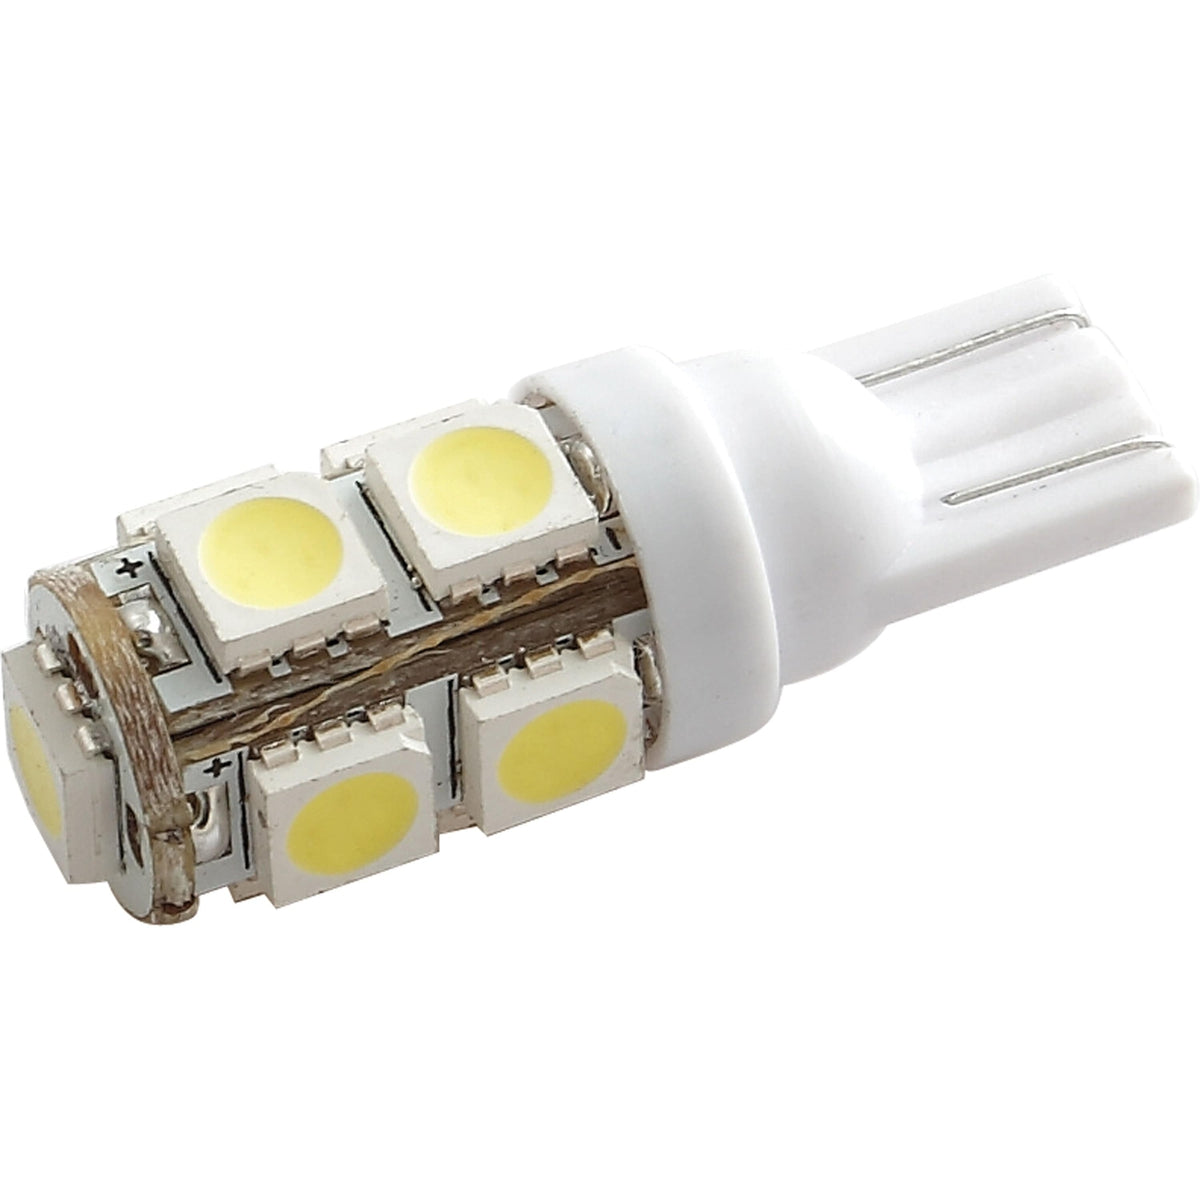 Ming's Mark Qualifies for Free Shipping Ming's Mark LongLife 12v LED Tower Bulb 194/T10 100 LM Warm White #5050113